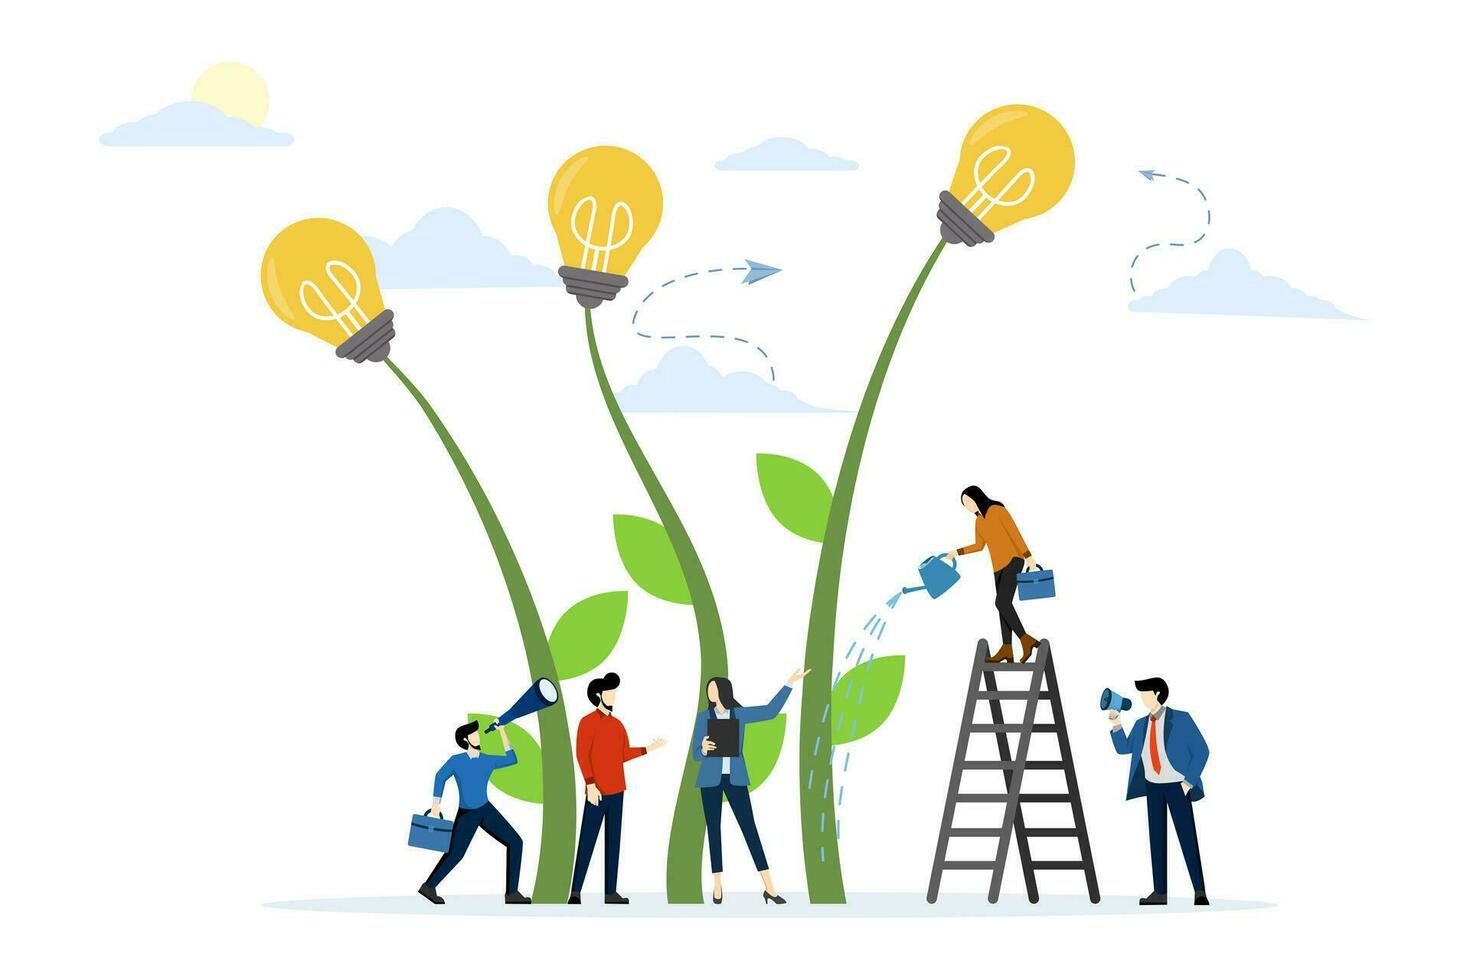 business analysis concept. people growing potted plants, a metaphor for a creative idea. graphic design idea of project activity, flat vector illustration on white background.